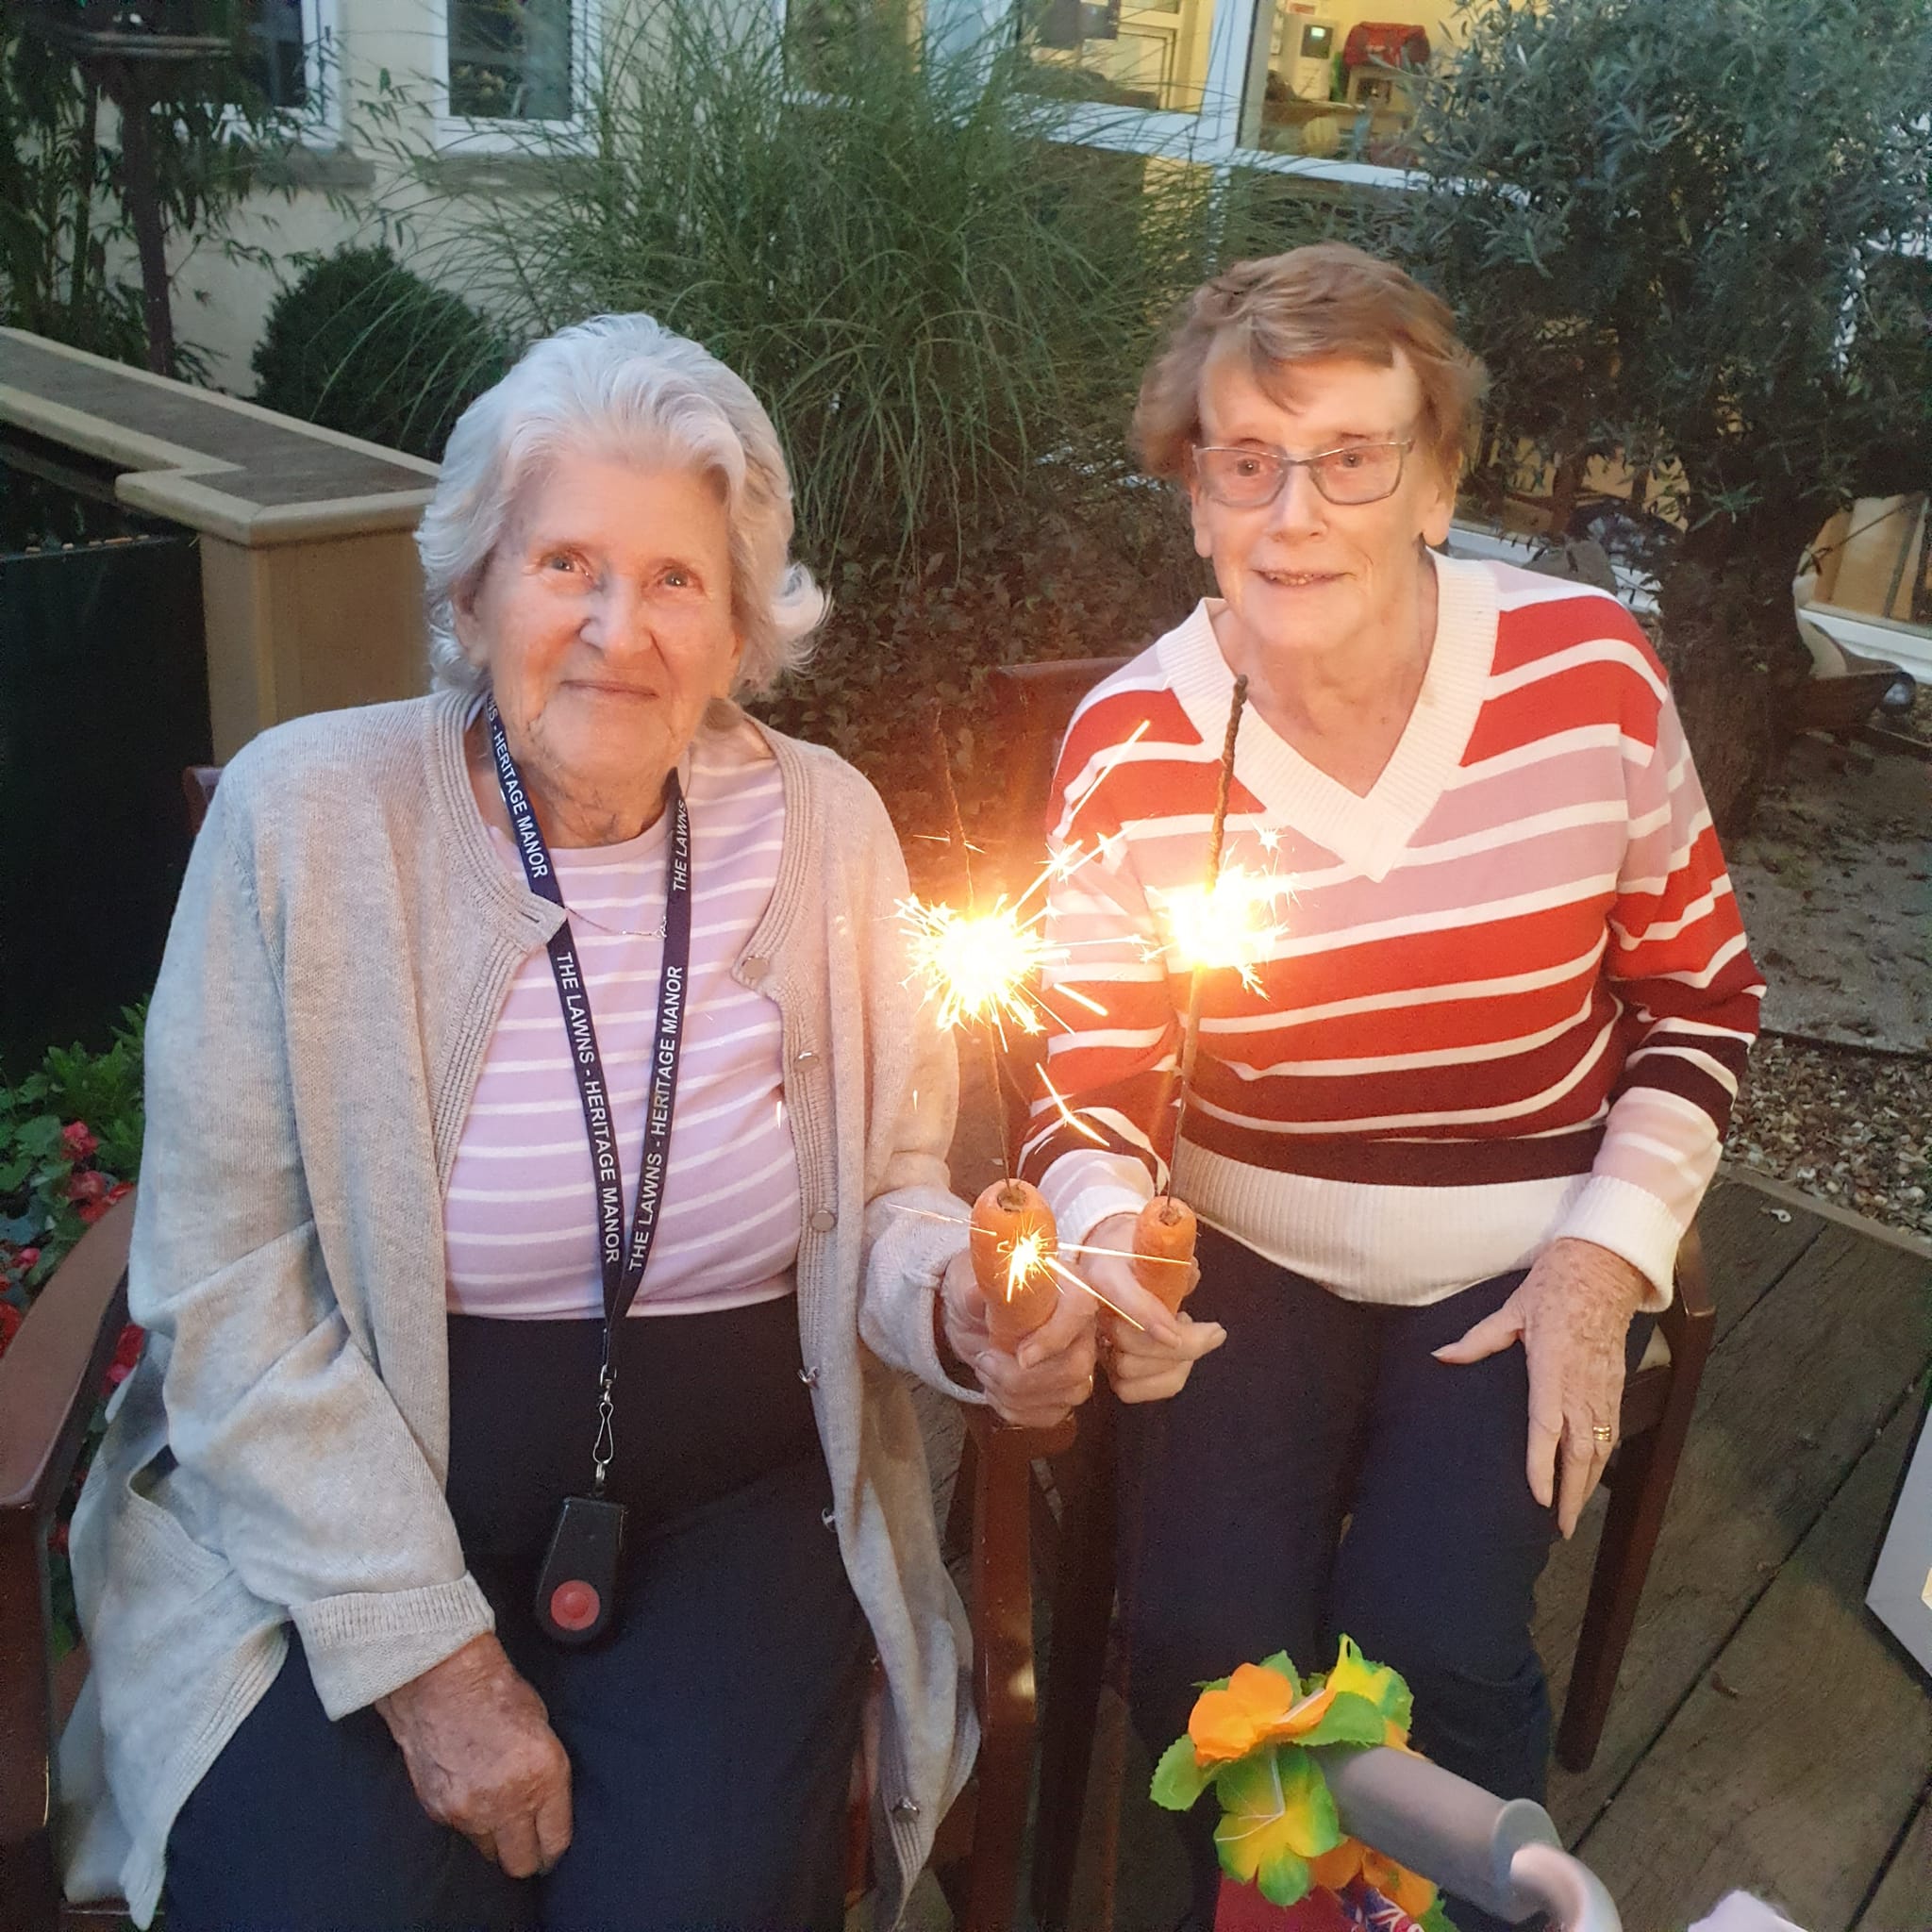 countdown to Christmas - two residents with sparklers